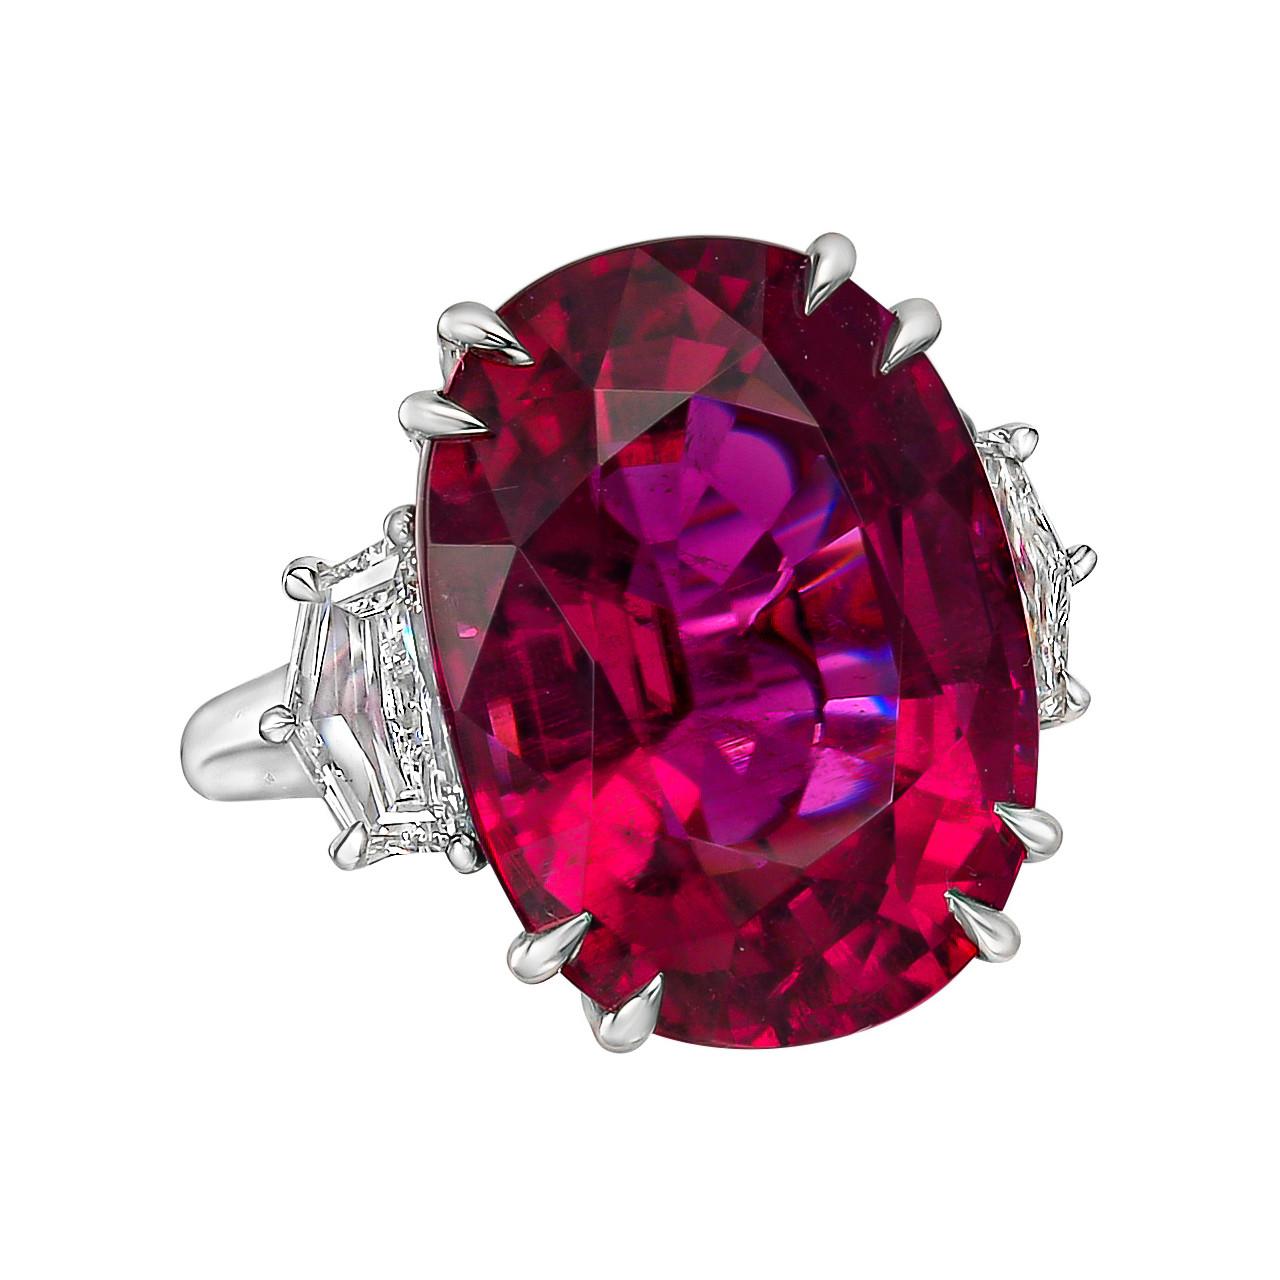 Cocktail ring, centering an oval-shaped pink tourmaline weighing 20.45 carats flanked by trapezoid-cut diamonds, mounted in polished platinum.

Two diamonds weighing 1.37 total carats (F-G color, VS1-VS2 clarity)